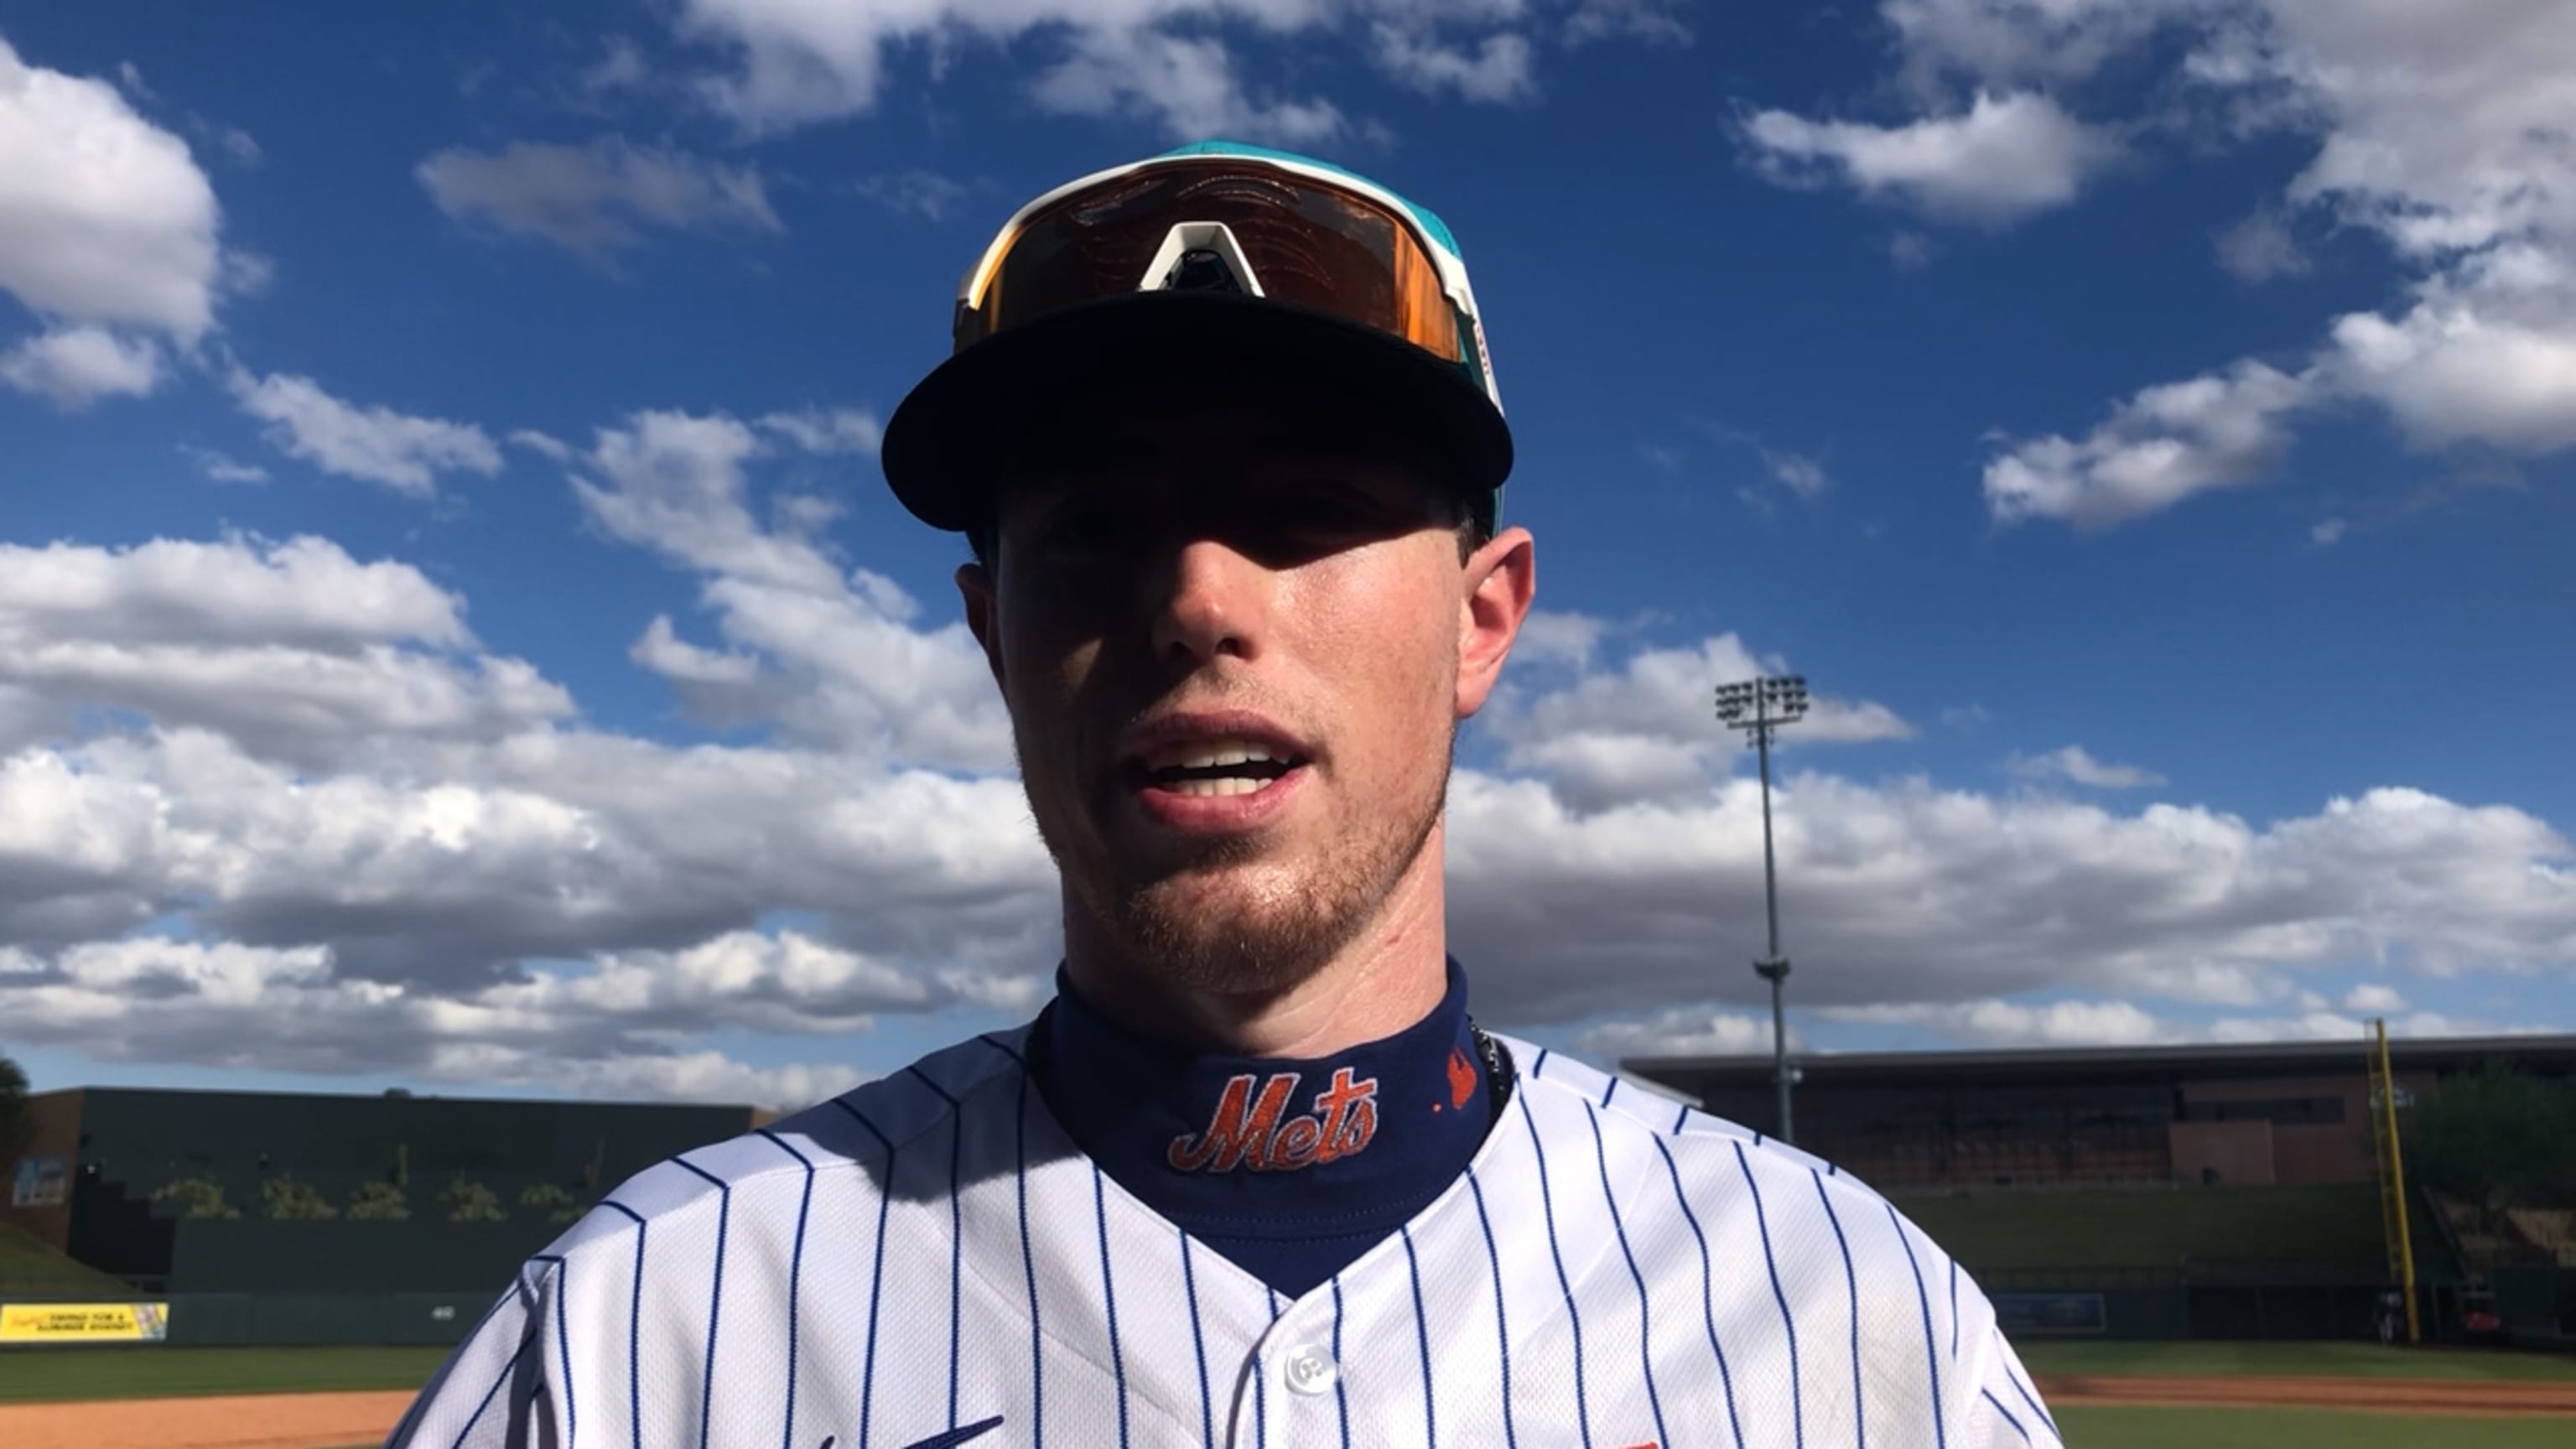 MLB Debut: Anthony Volpe, Yankees - RotoProspects